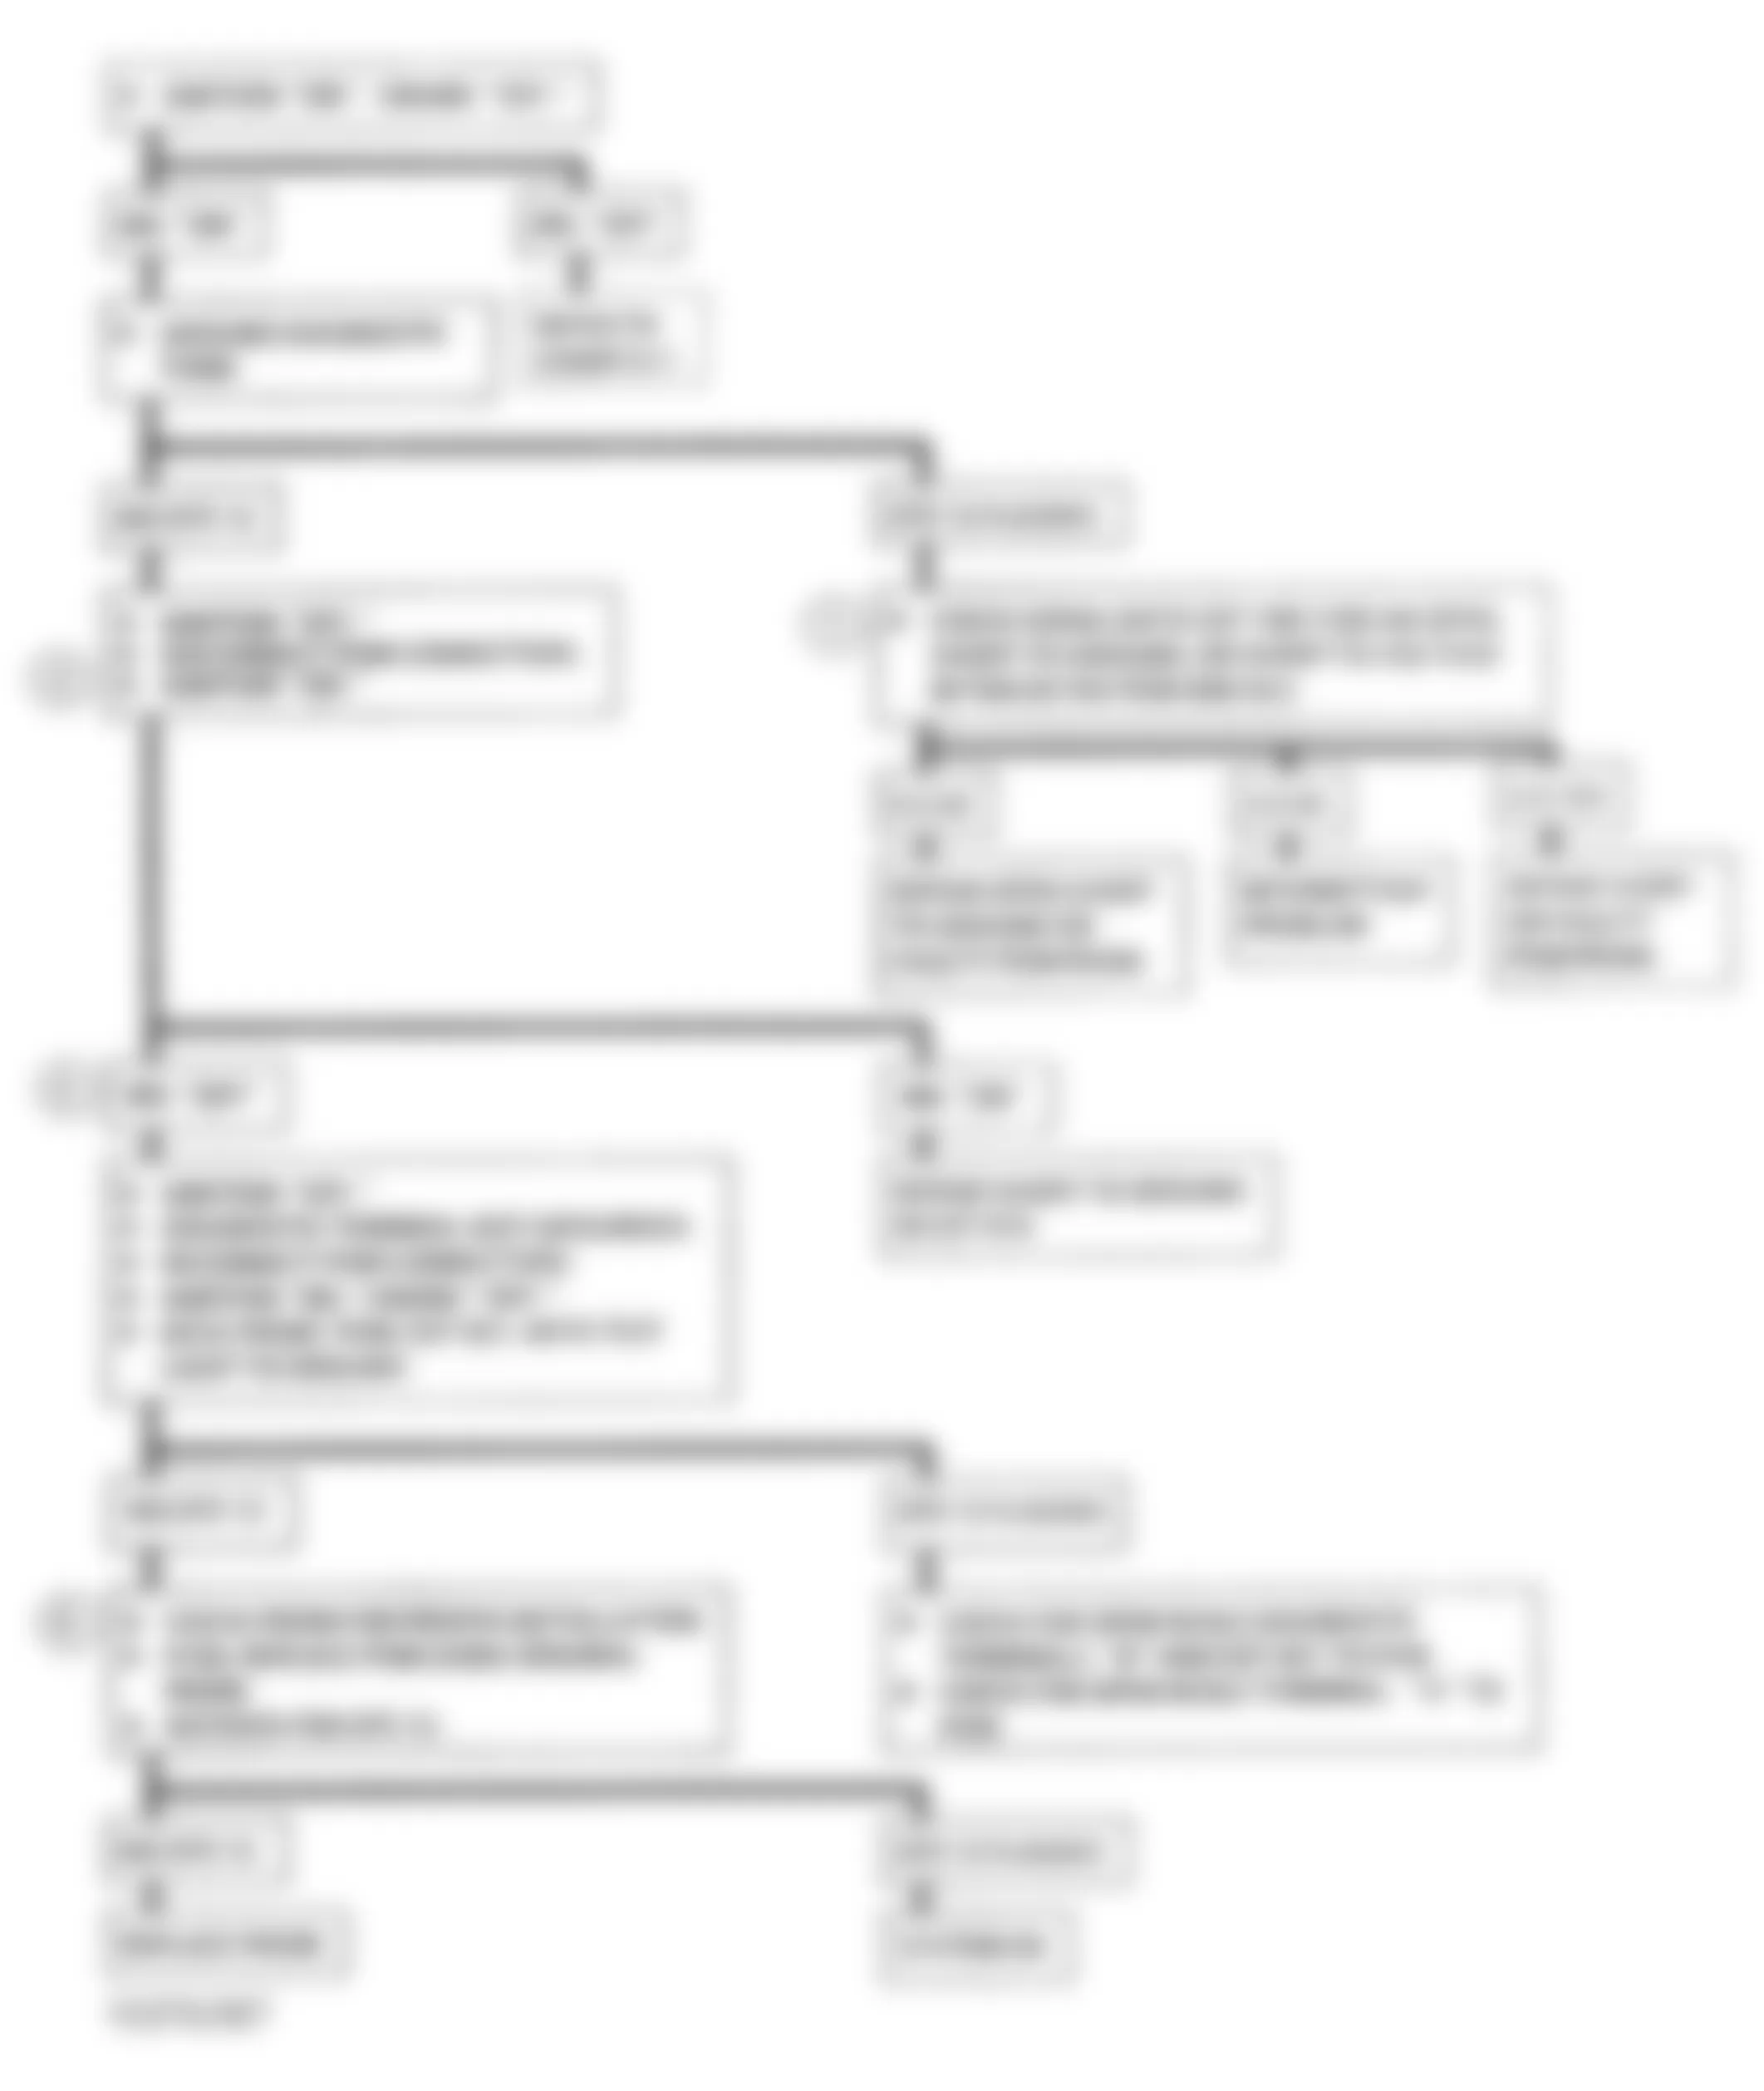 Chevrolet Sportvan G30 1993 - Component Locations -  A-2, Flowchart, No DLC Data, MIL On All Time - A/T